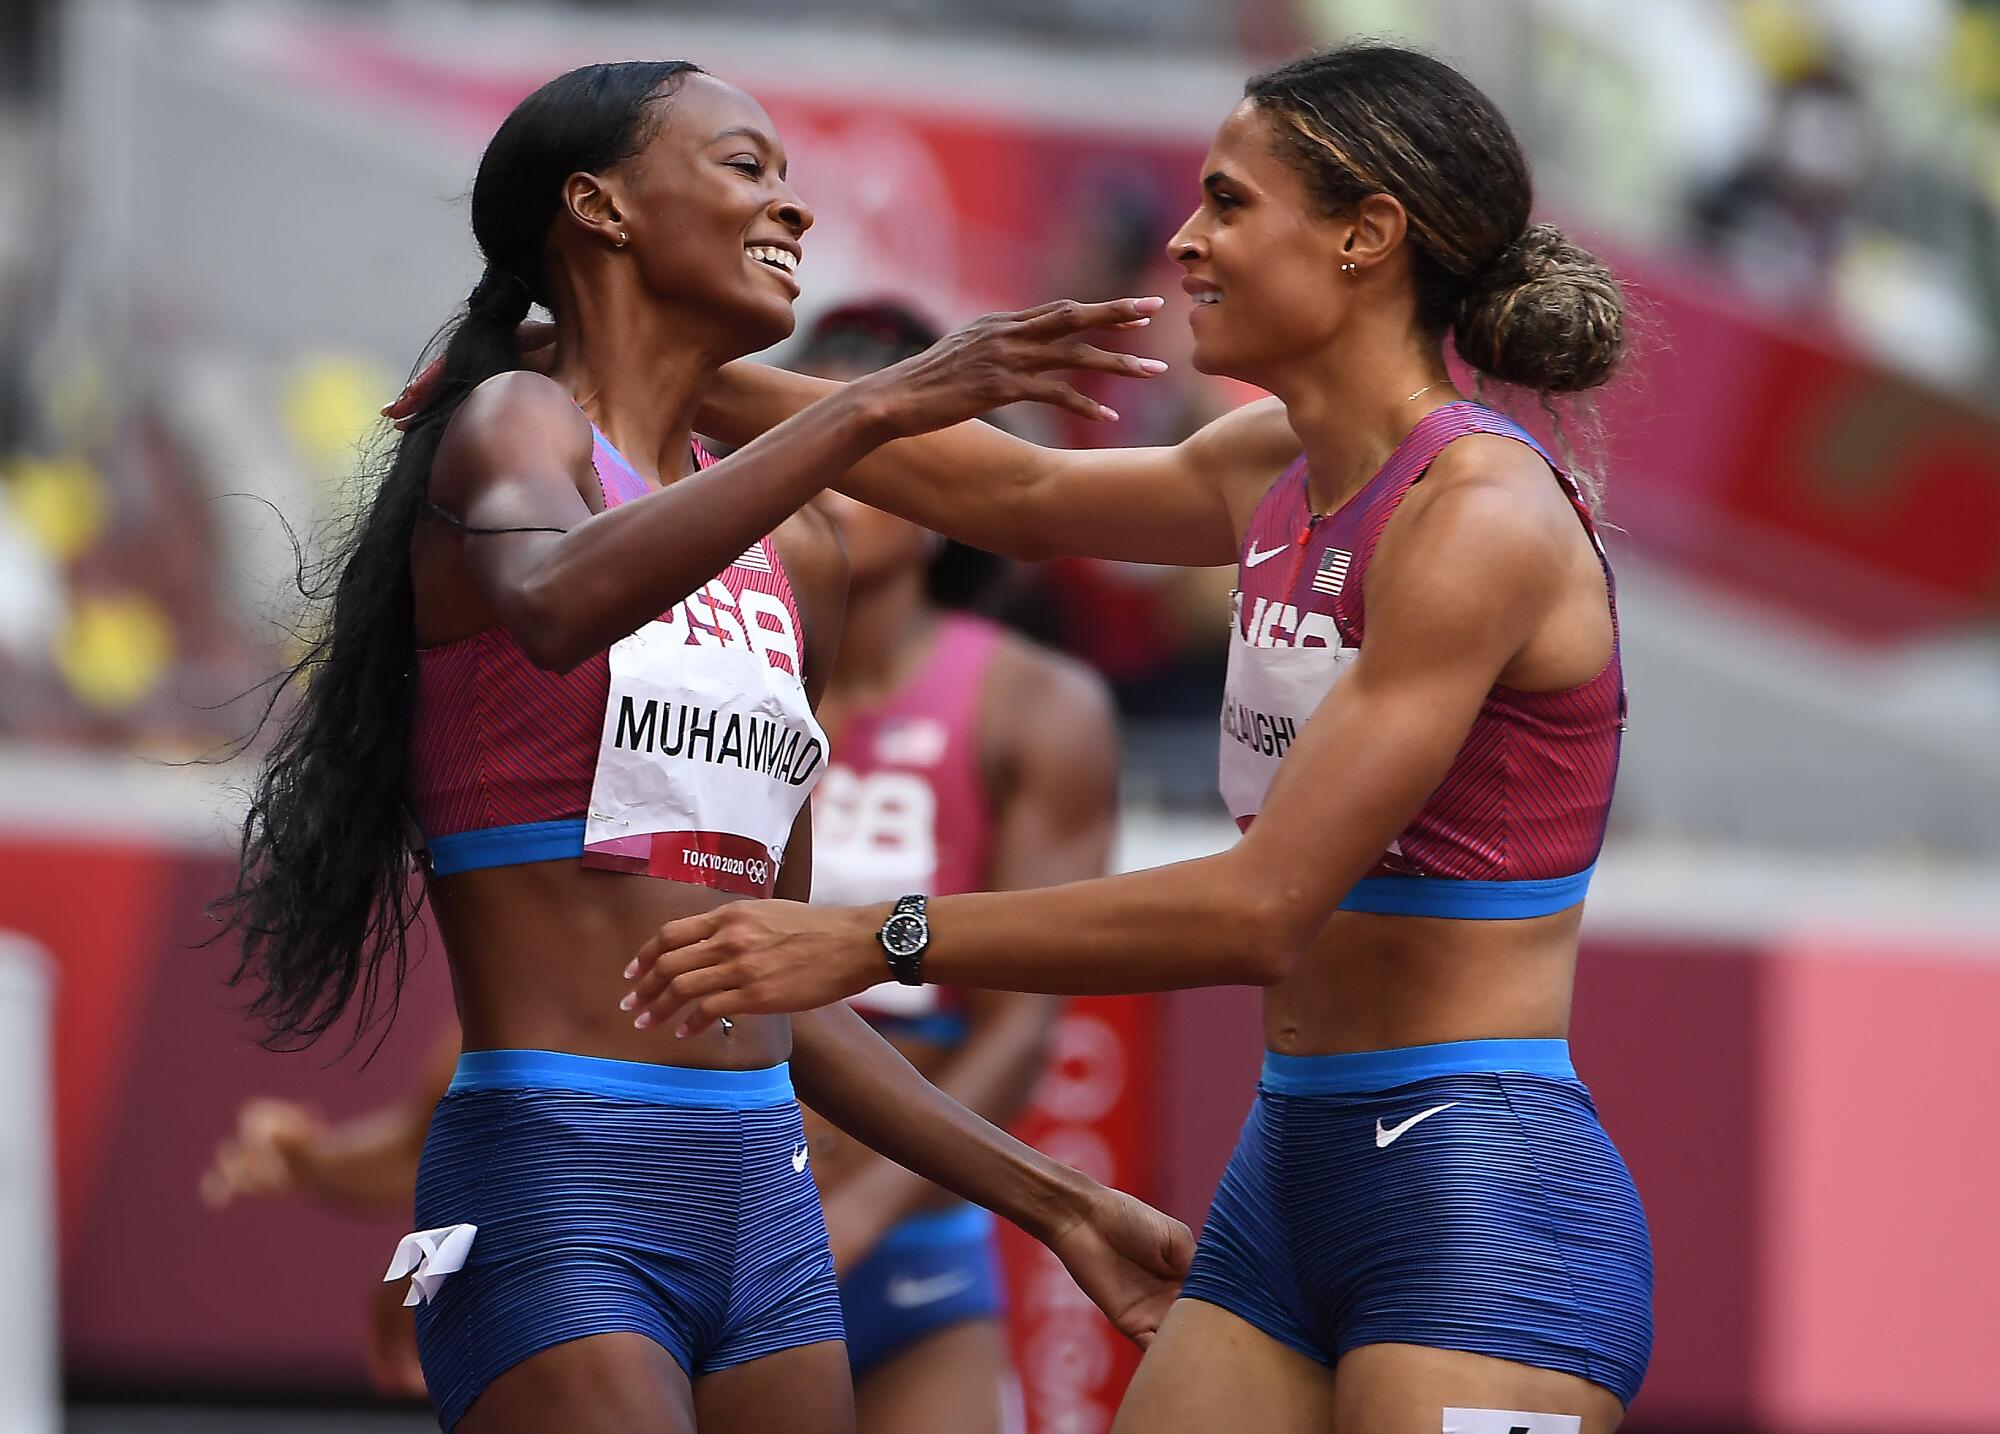 Gold medalist Sydney McLaughlin, right, and silver medalist Dalilah Muhammad celebrate after the 400-meter hurdles.